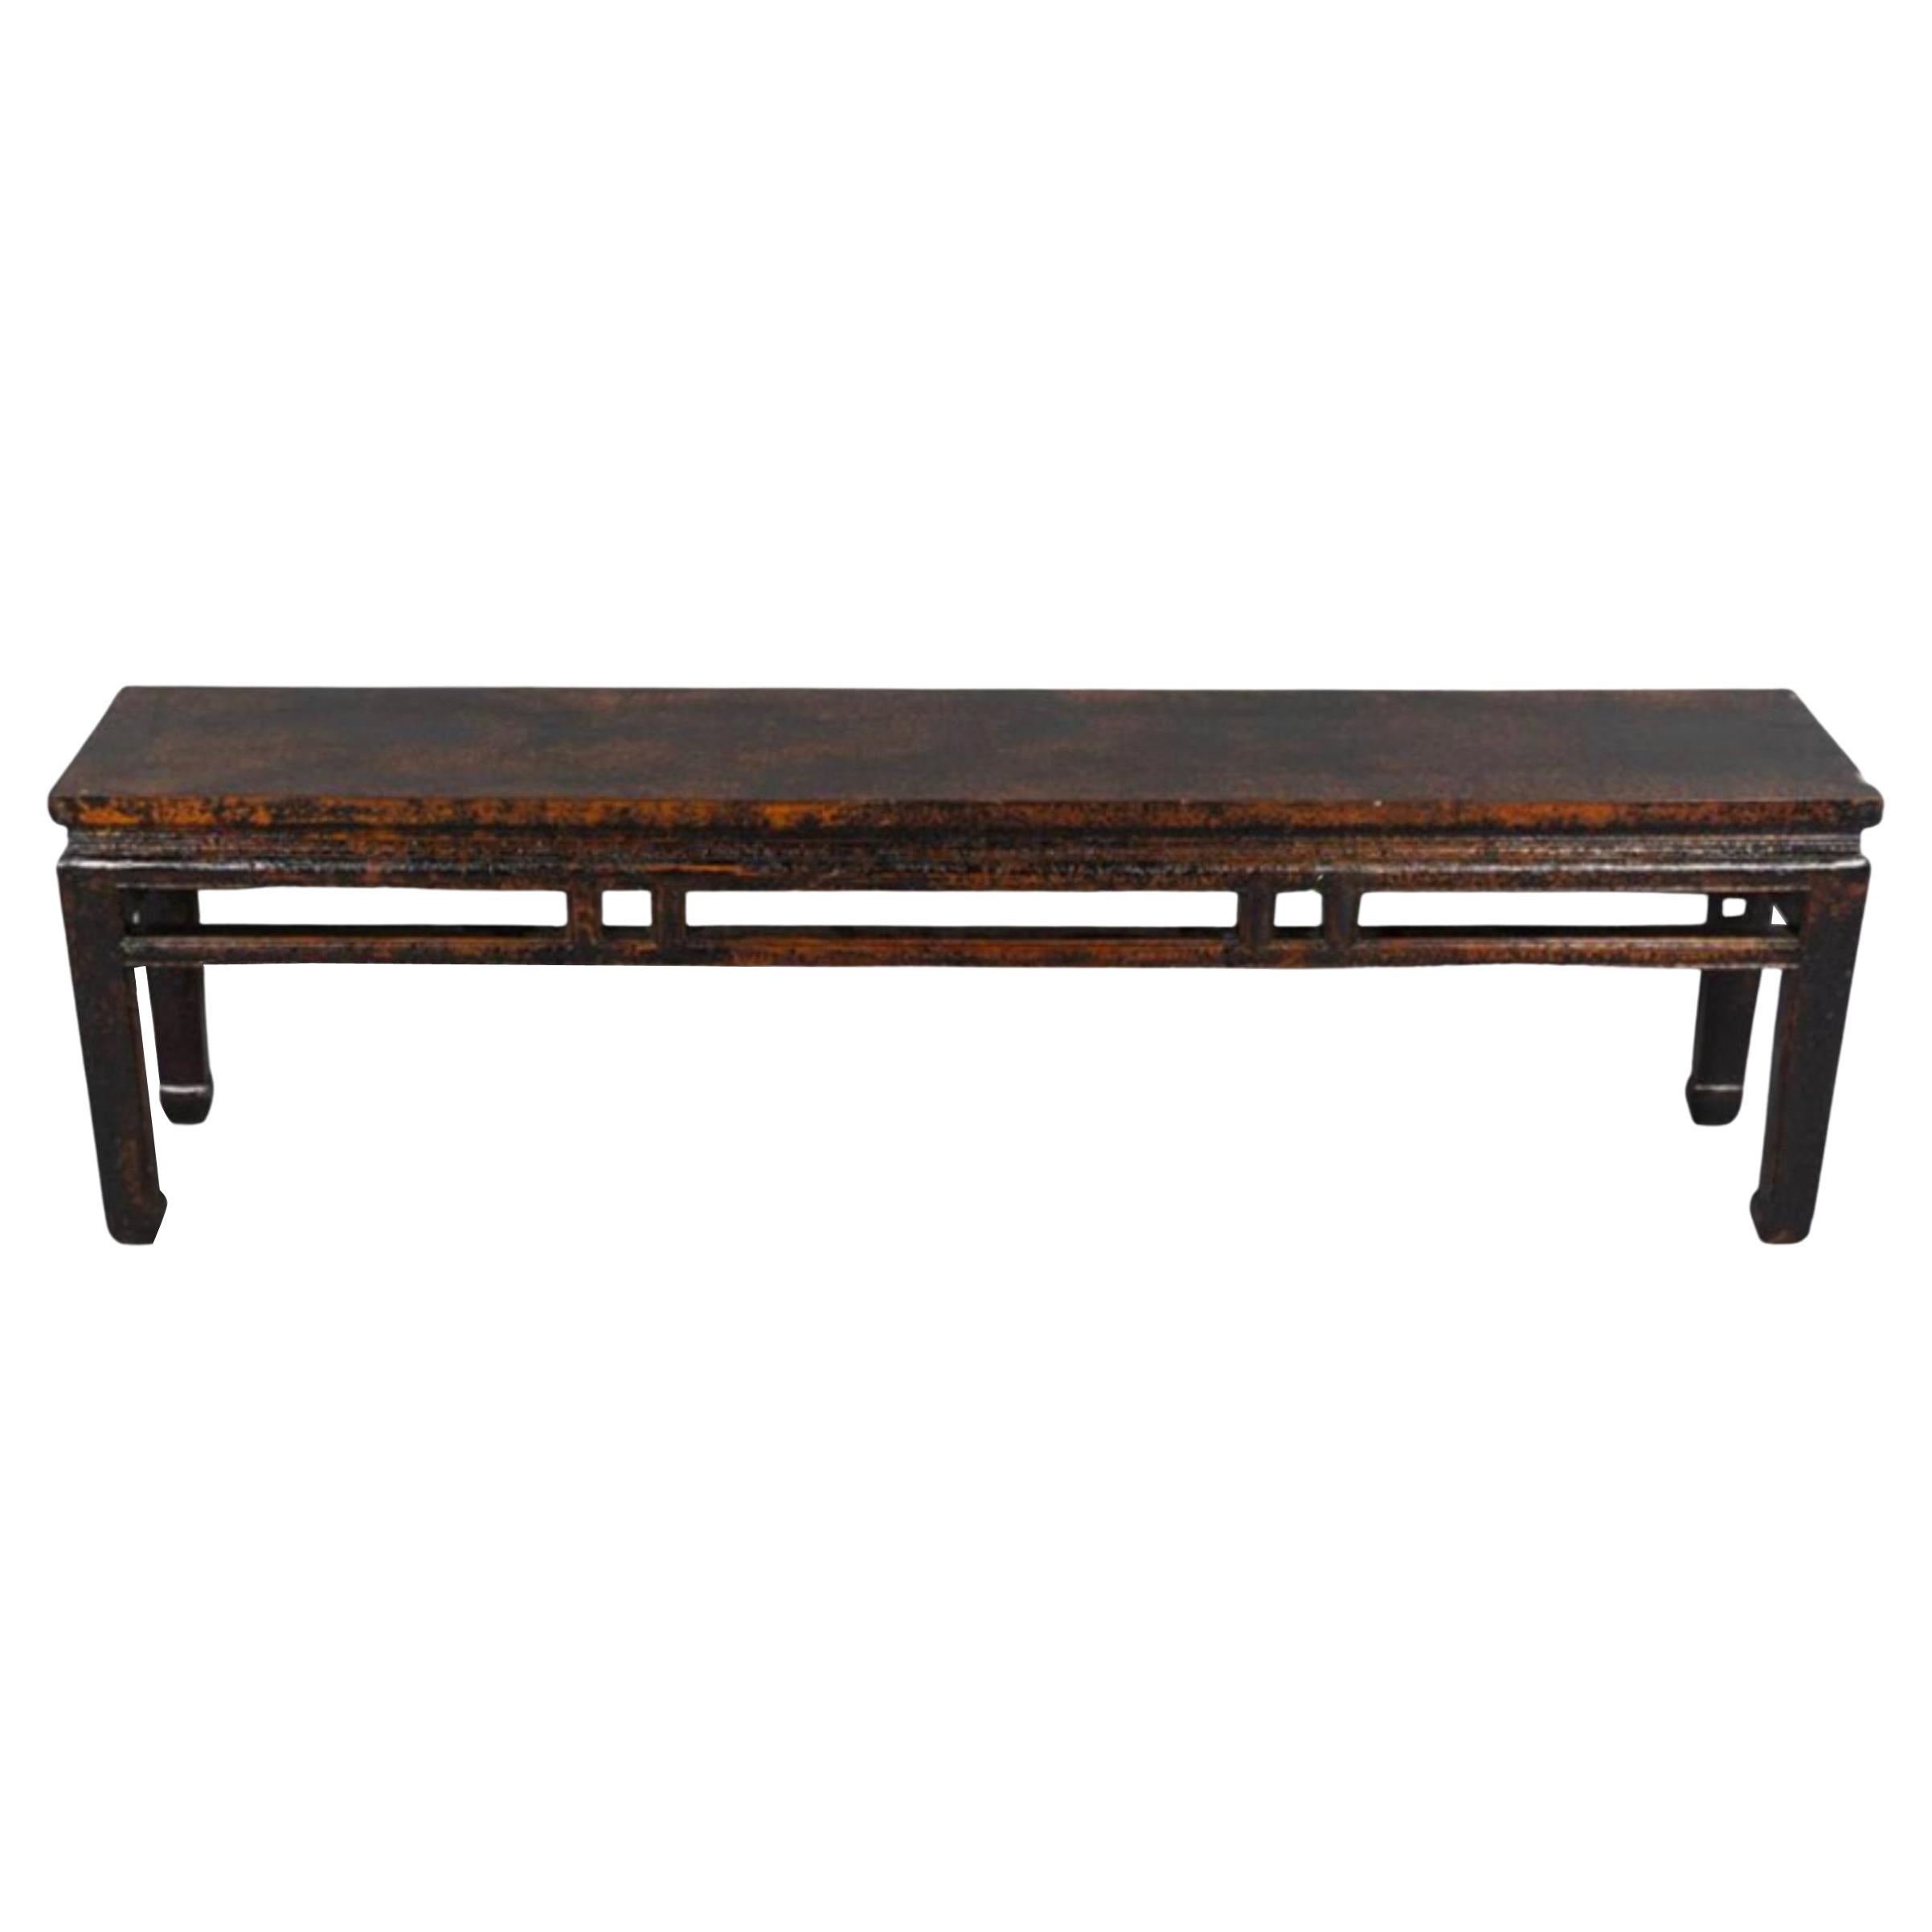 Mid-18th Century Chinoiserie Textured Lacquer Wood Long Bench For Sale